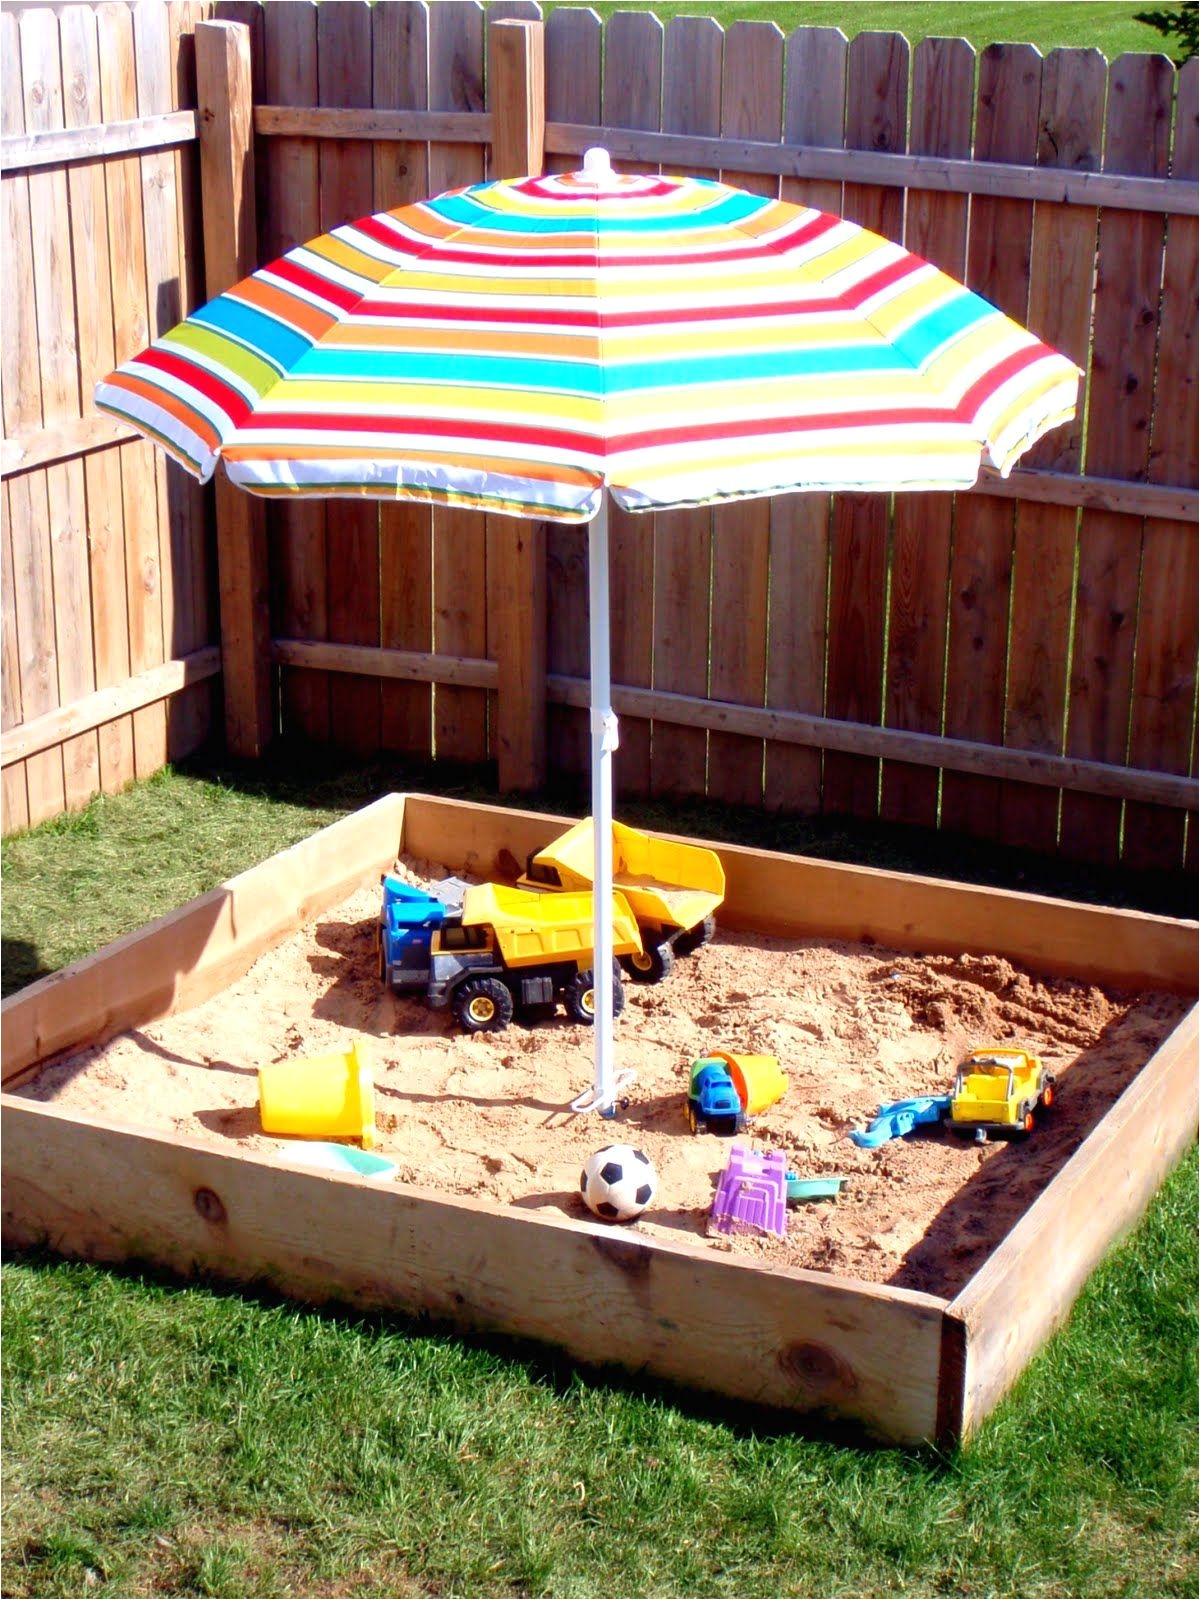 use beach umbrella to provide shade over the sandbox to secure use pvc that has been drilled into the base of the sandbox and stick in the umbrella pole